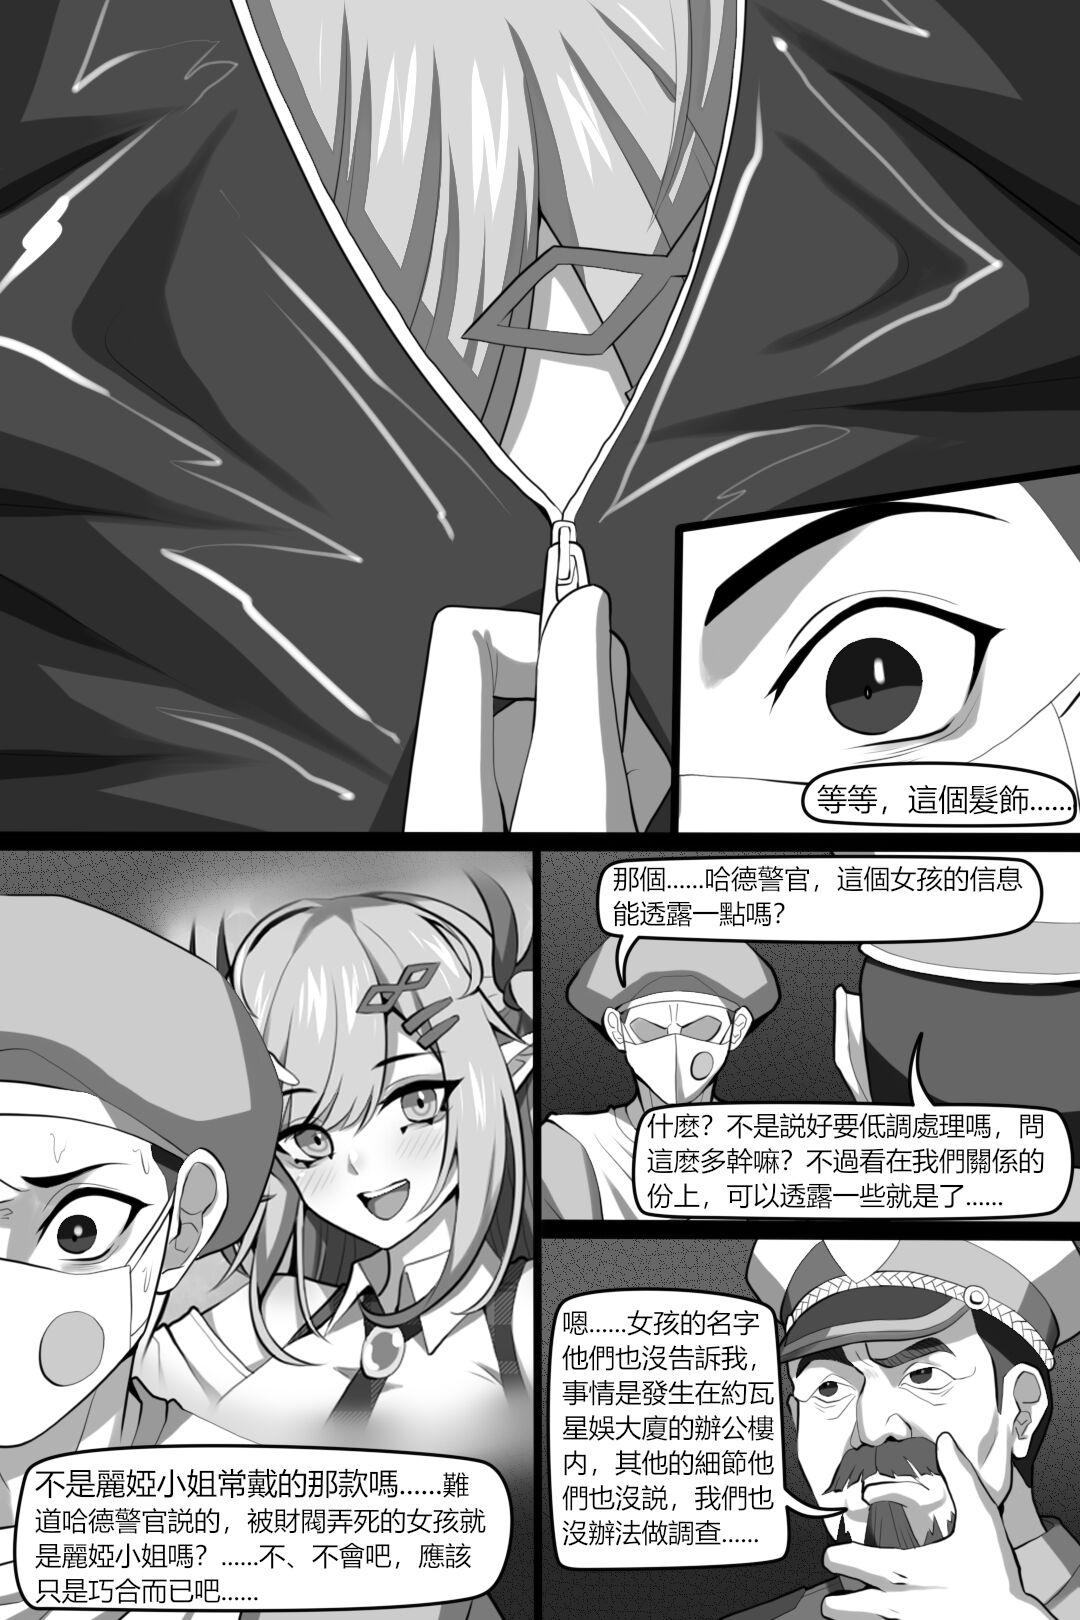 British Bin Lian City Stories Chapter 3: Corrupted Forensic - Original Hardsex - Page 11